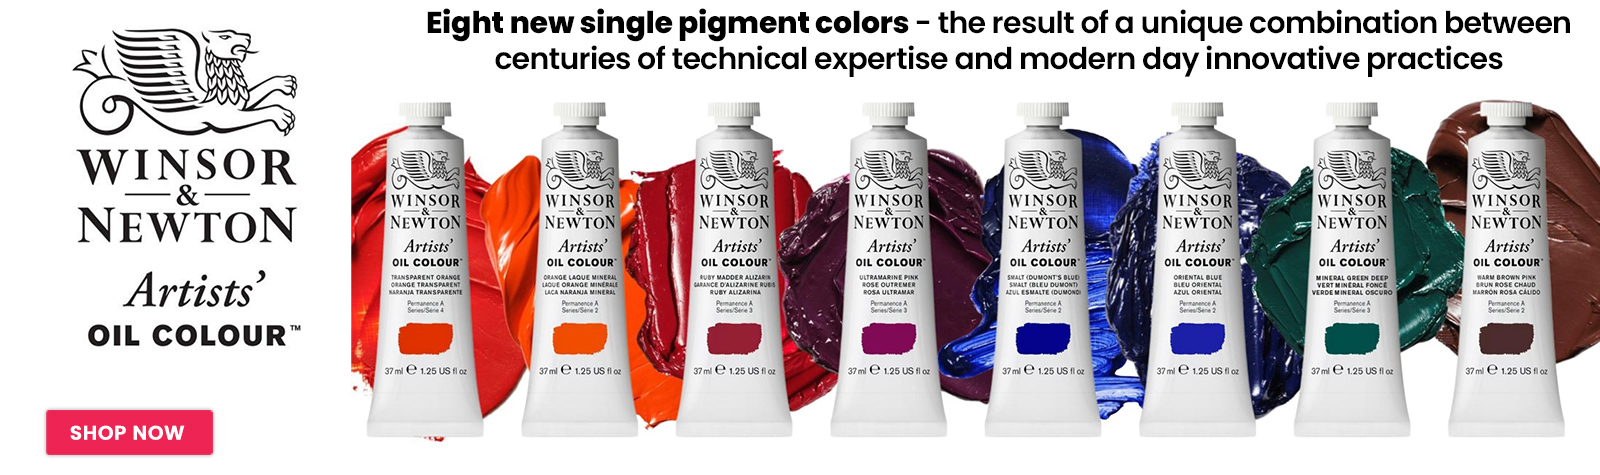 Winsor & Newton Artists' Oil Colors No Free Gift